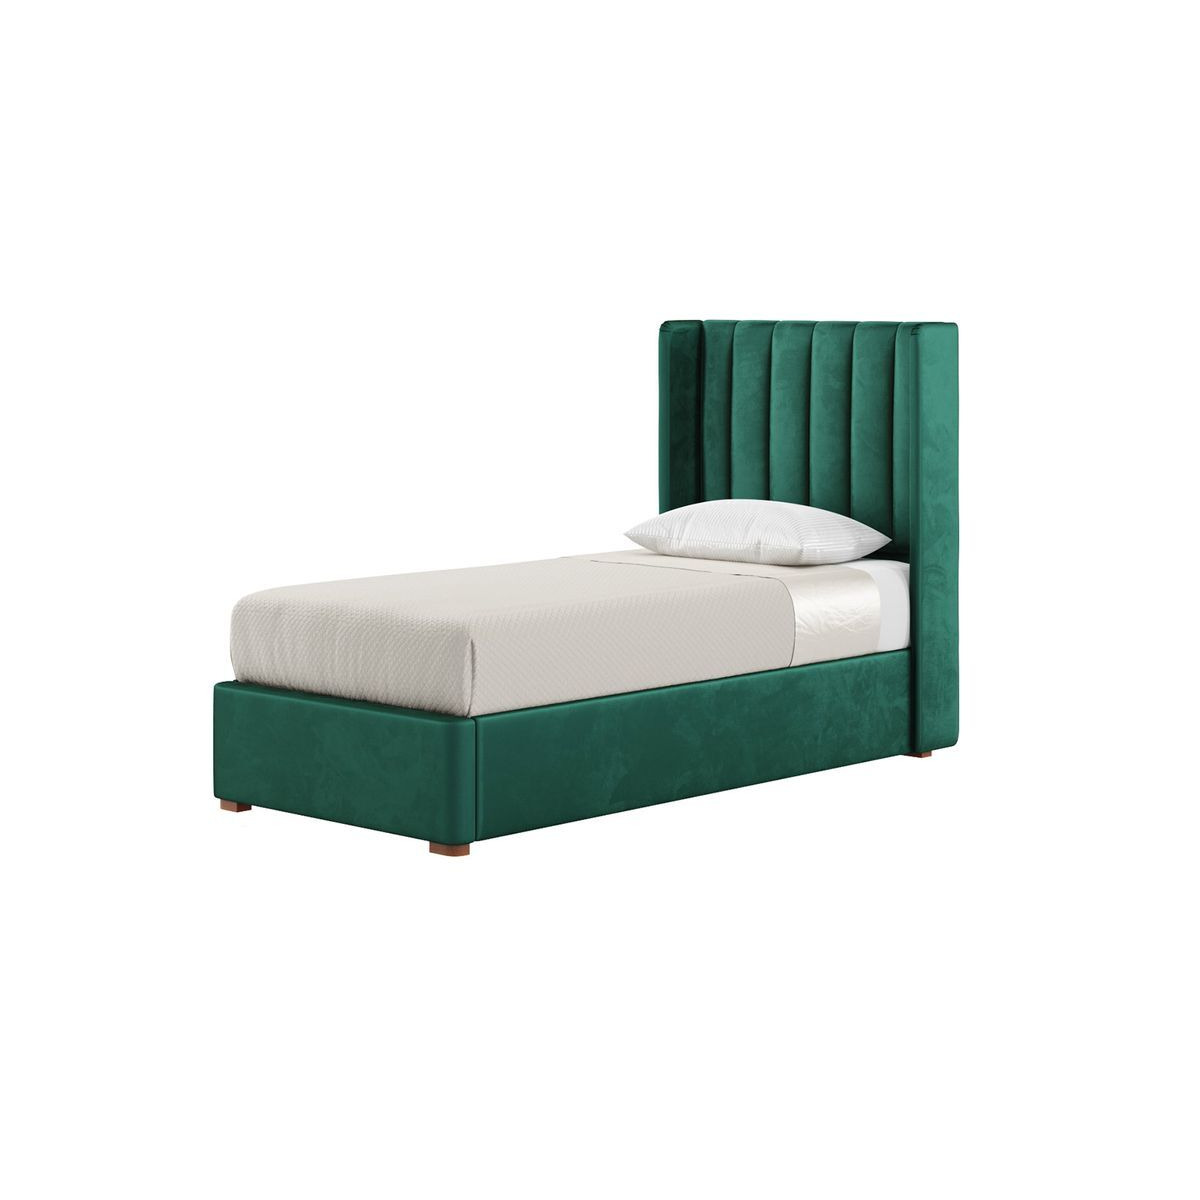 Naomi 3ft Single Bed Frame With Fluted Vertical Stitch Wing Headboard, dark green, Leg colour: aveo - image 1